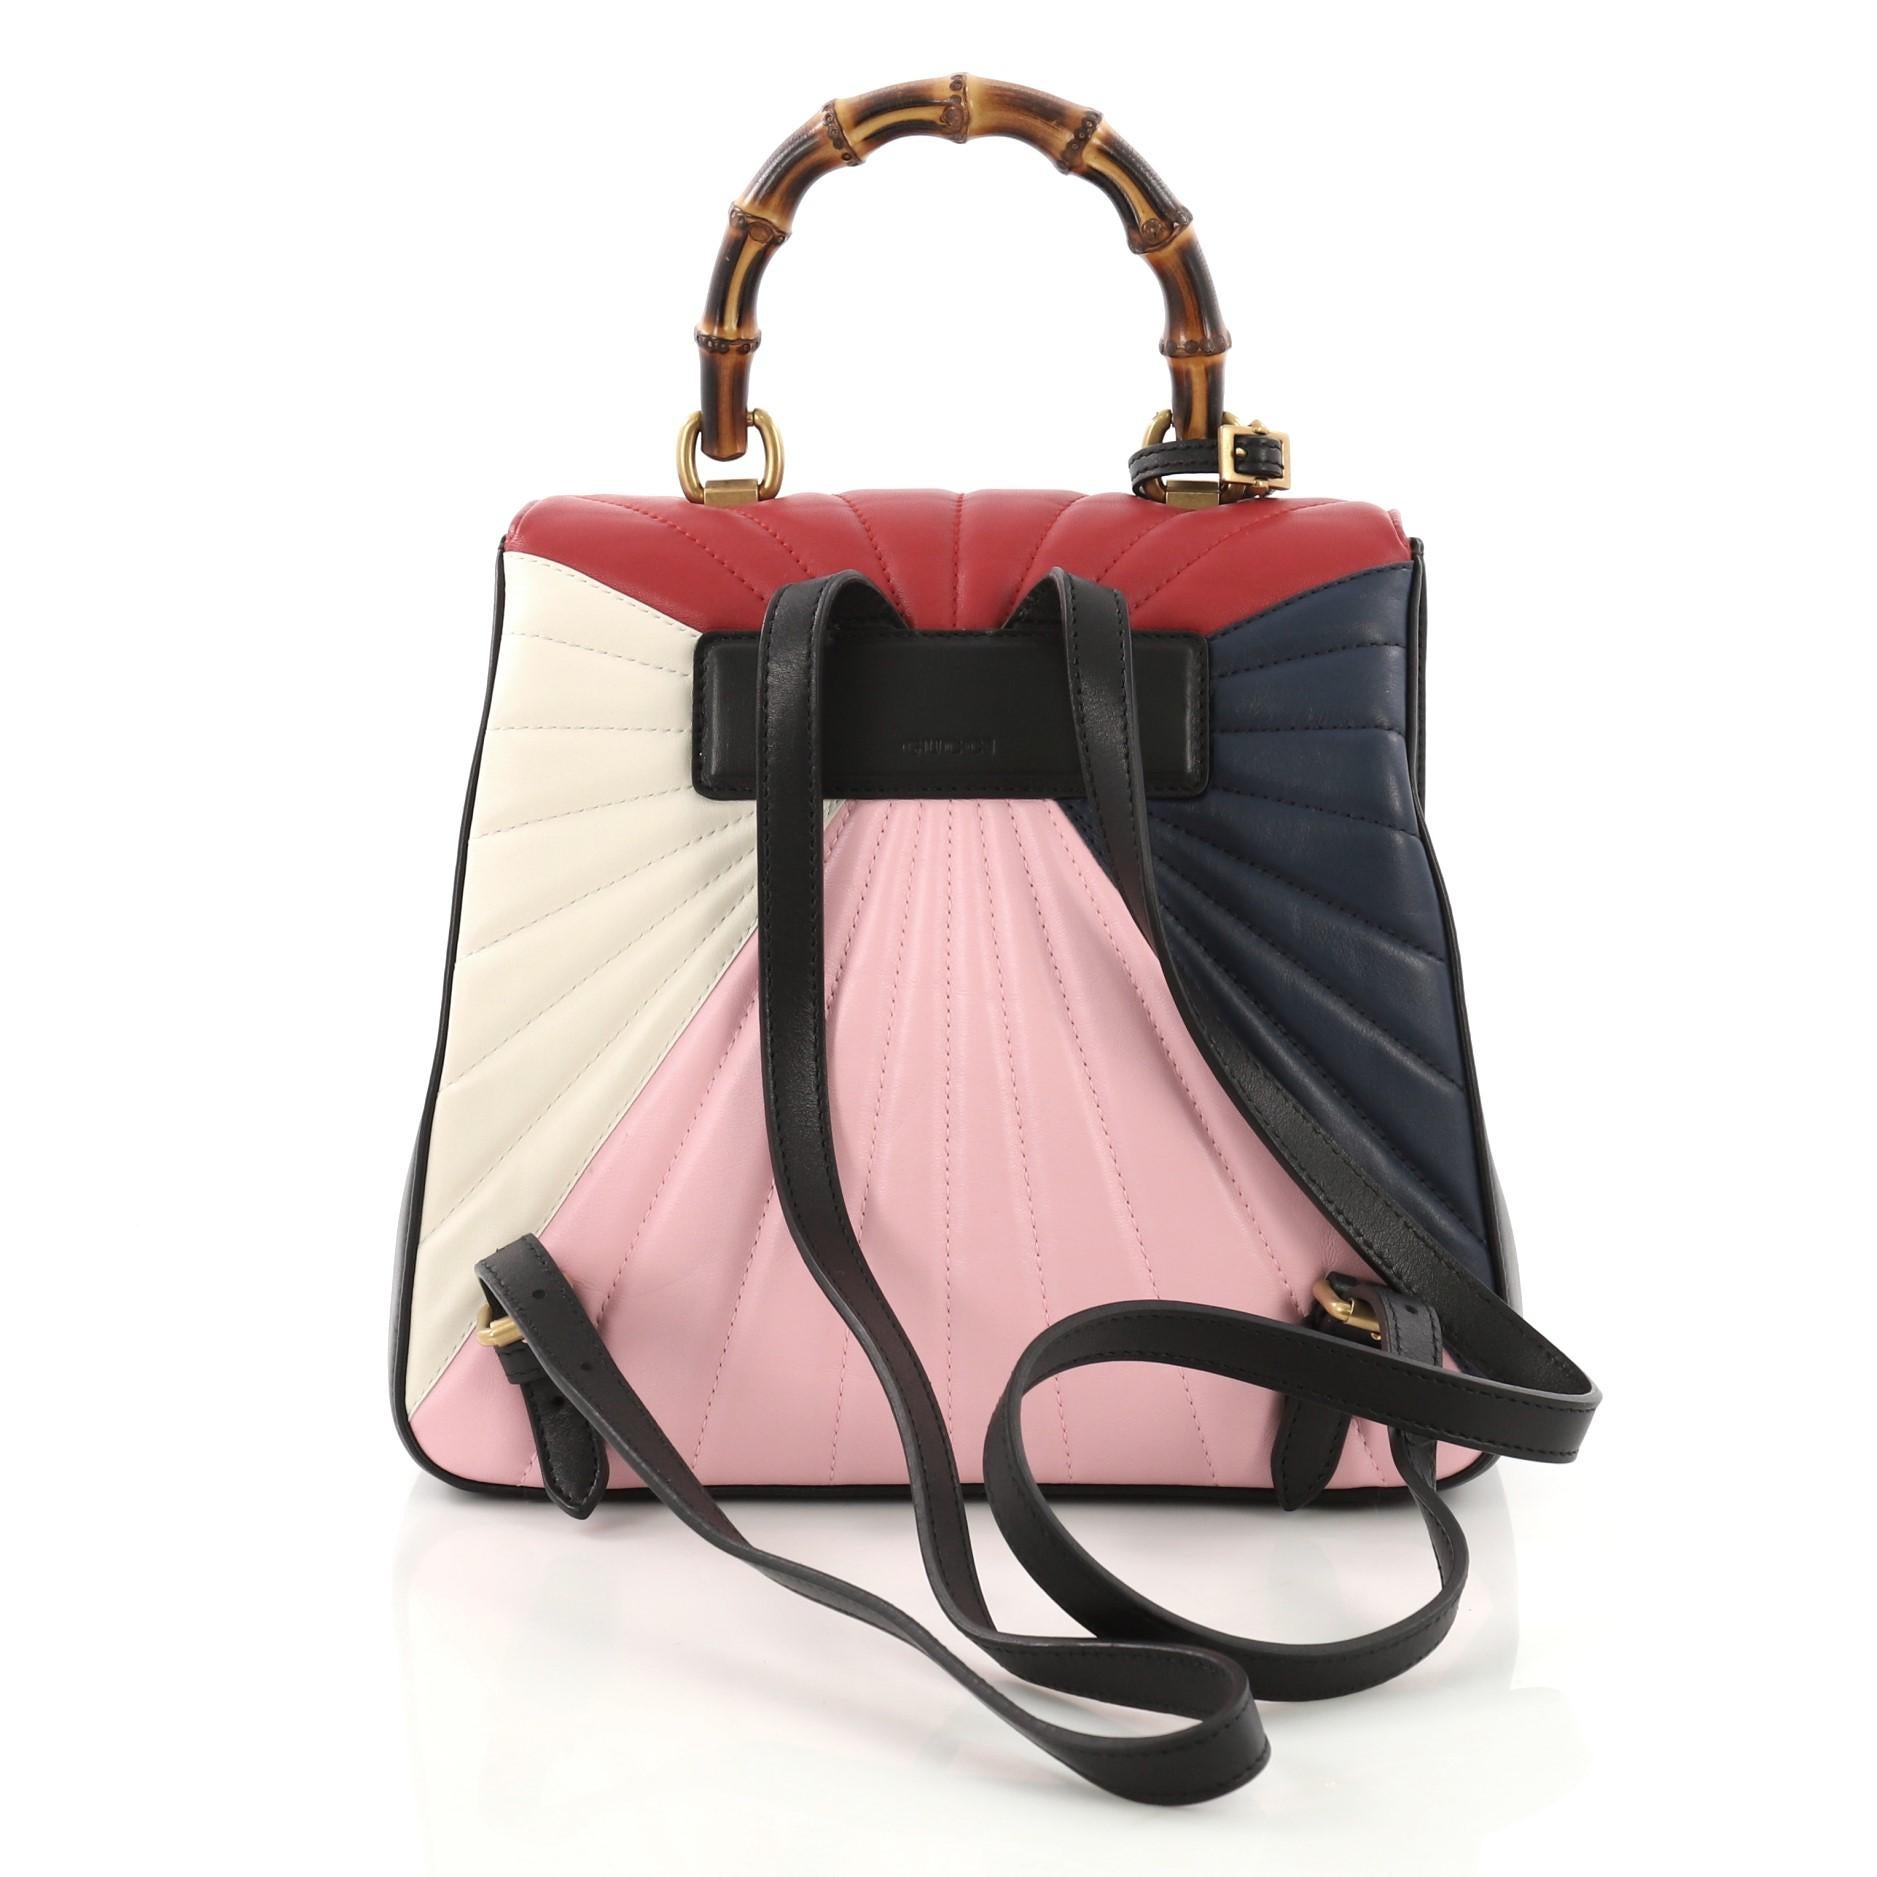 gucci queen margaret quilted leather backpack